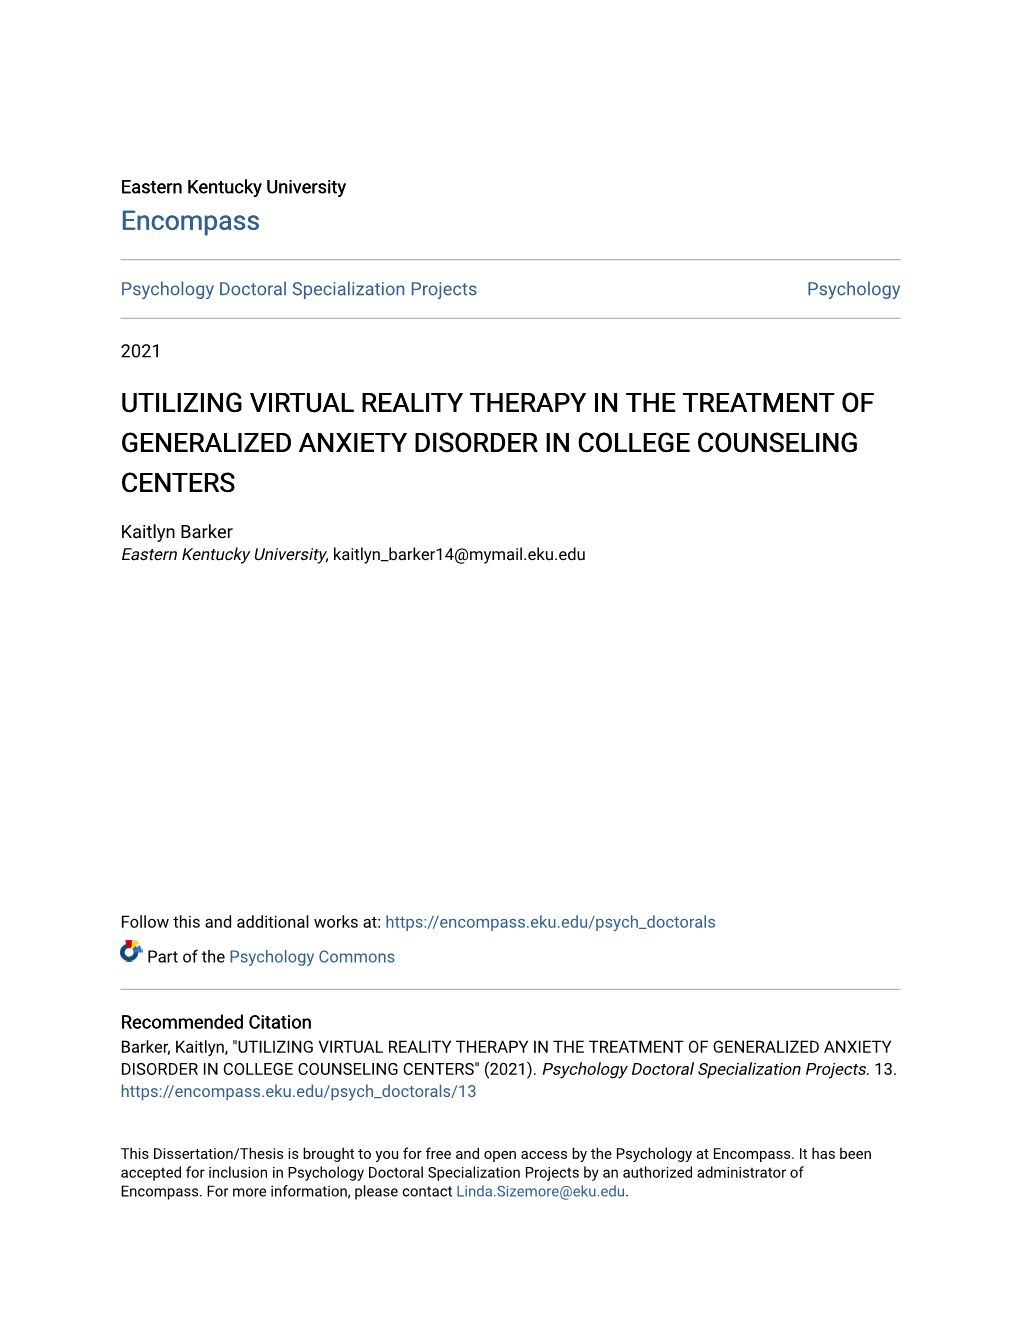 Utilizing Virtual Reality Therapy in the Treatment of Generalized Anxiety Disorder in College Counseling Centers